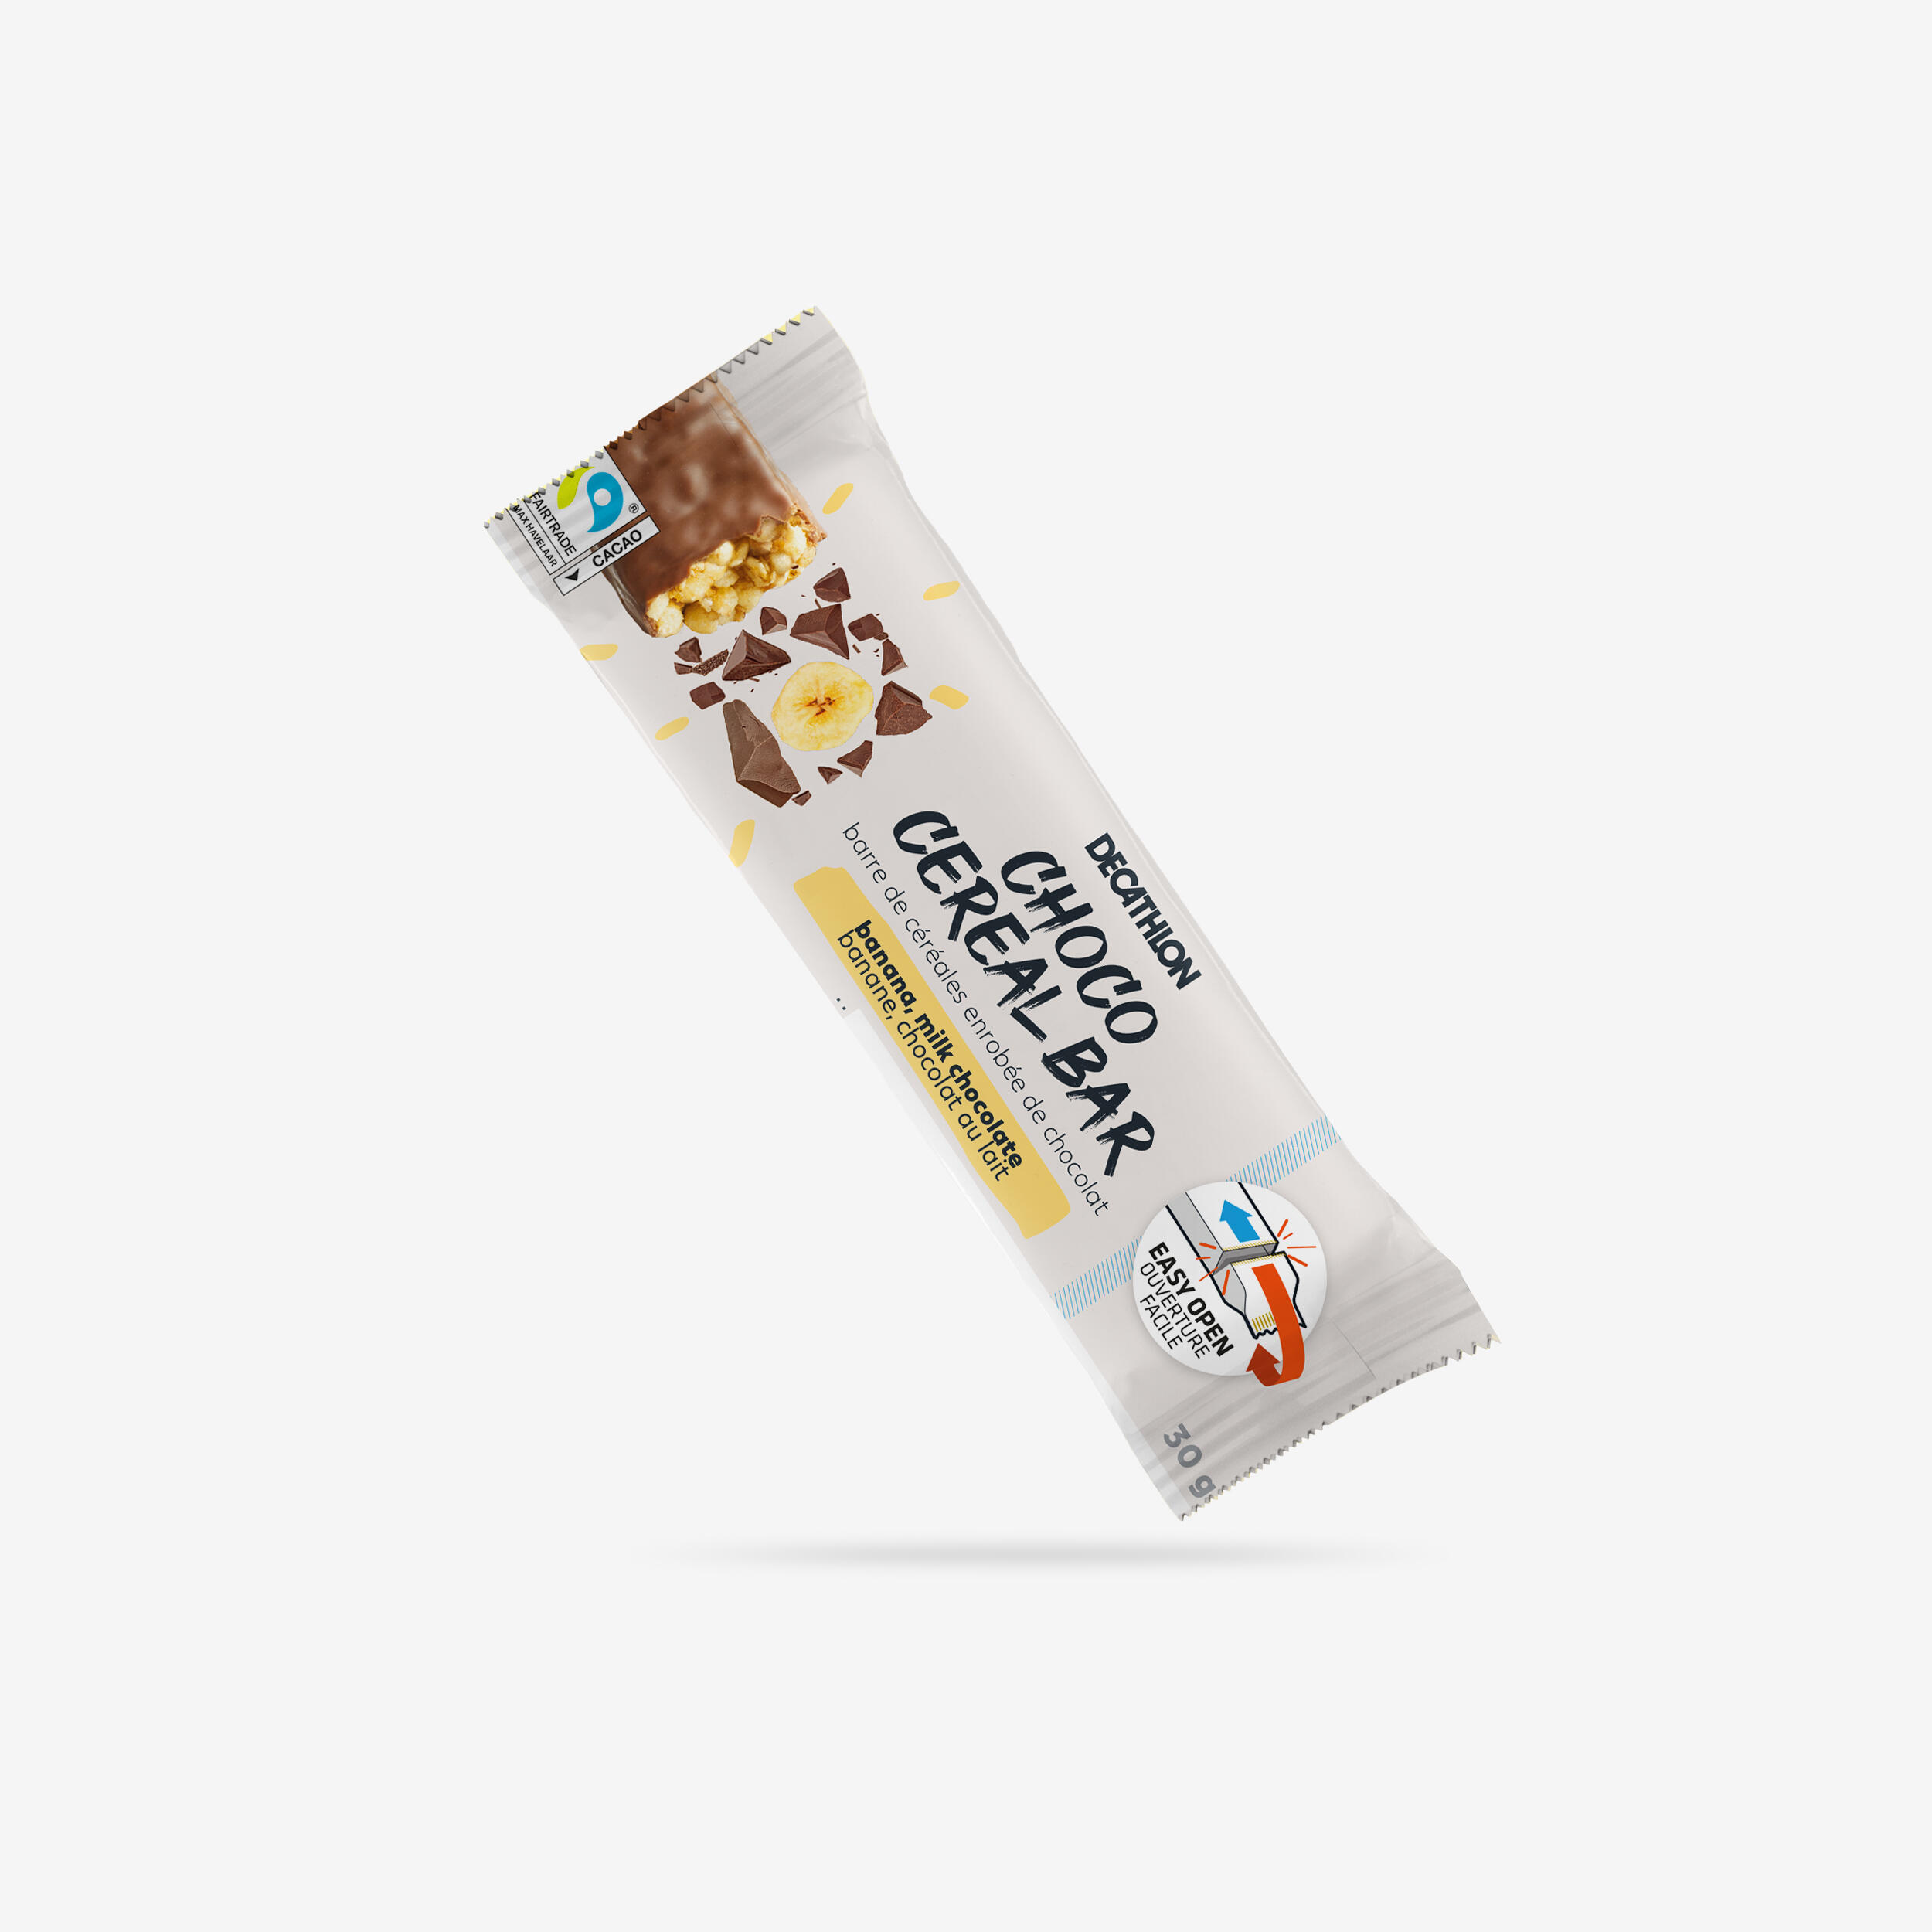 Banana-flavoured cereal bar coated in milk chocolate 1/4